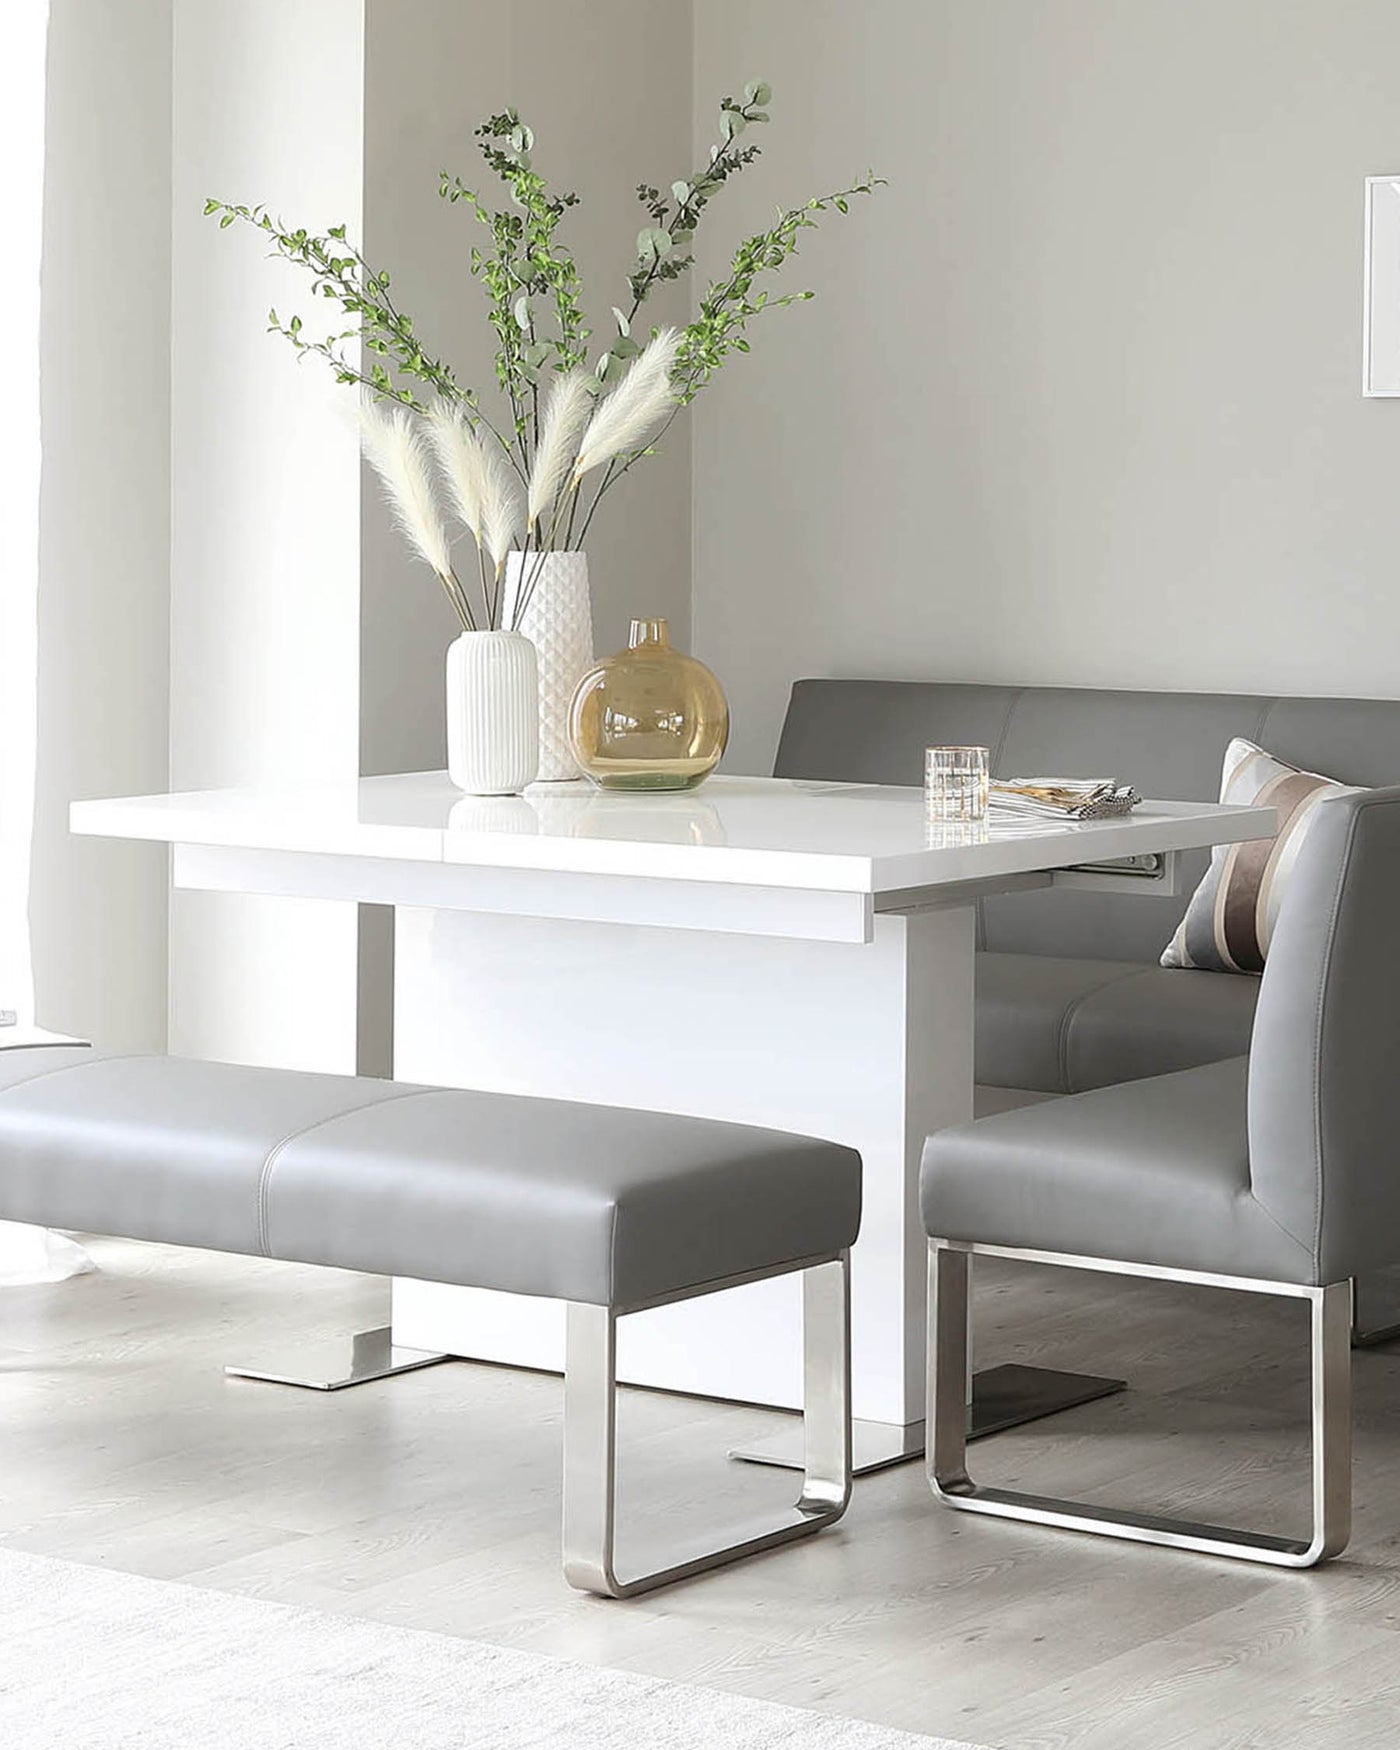 A modern dining set featuring a glossy white rectangular table with sleek, minimalistic lines and a set of two padded benches upholstered in light grey leatherette, each supported by lustrous chrome U-shaped legs. The ensemble suggests a contemporary, clean aesthetic for a sophisticated dining space.